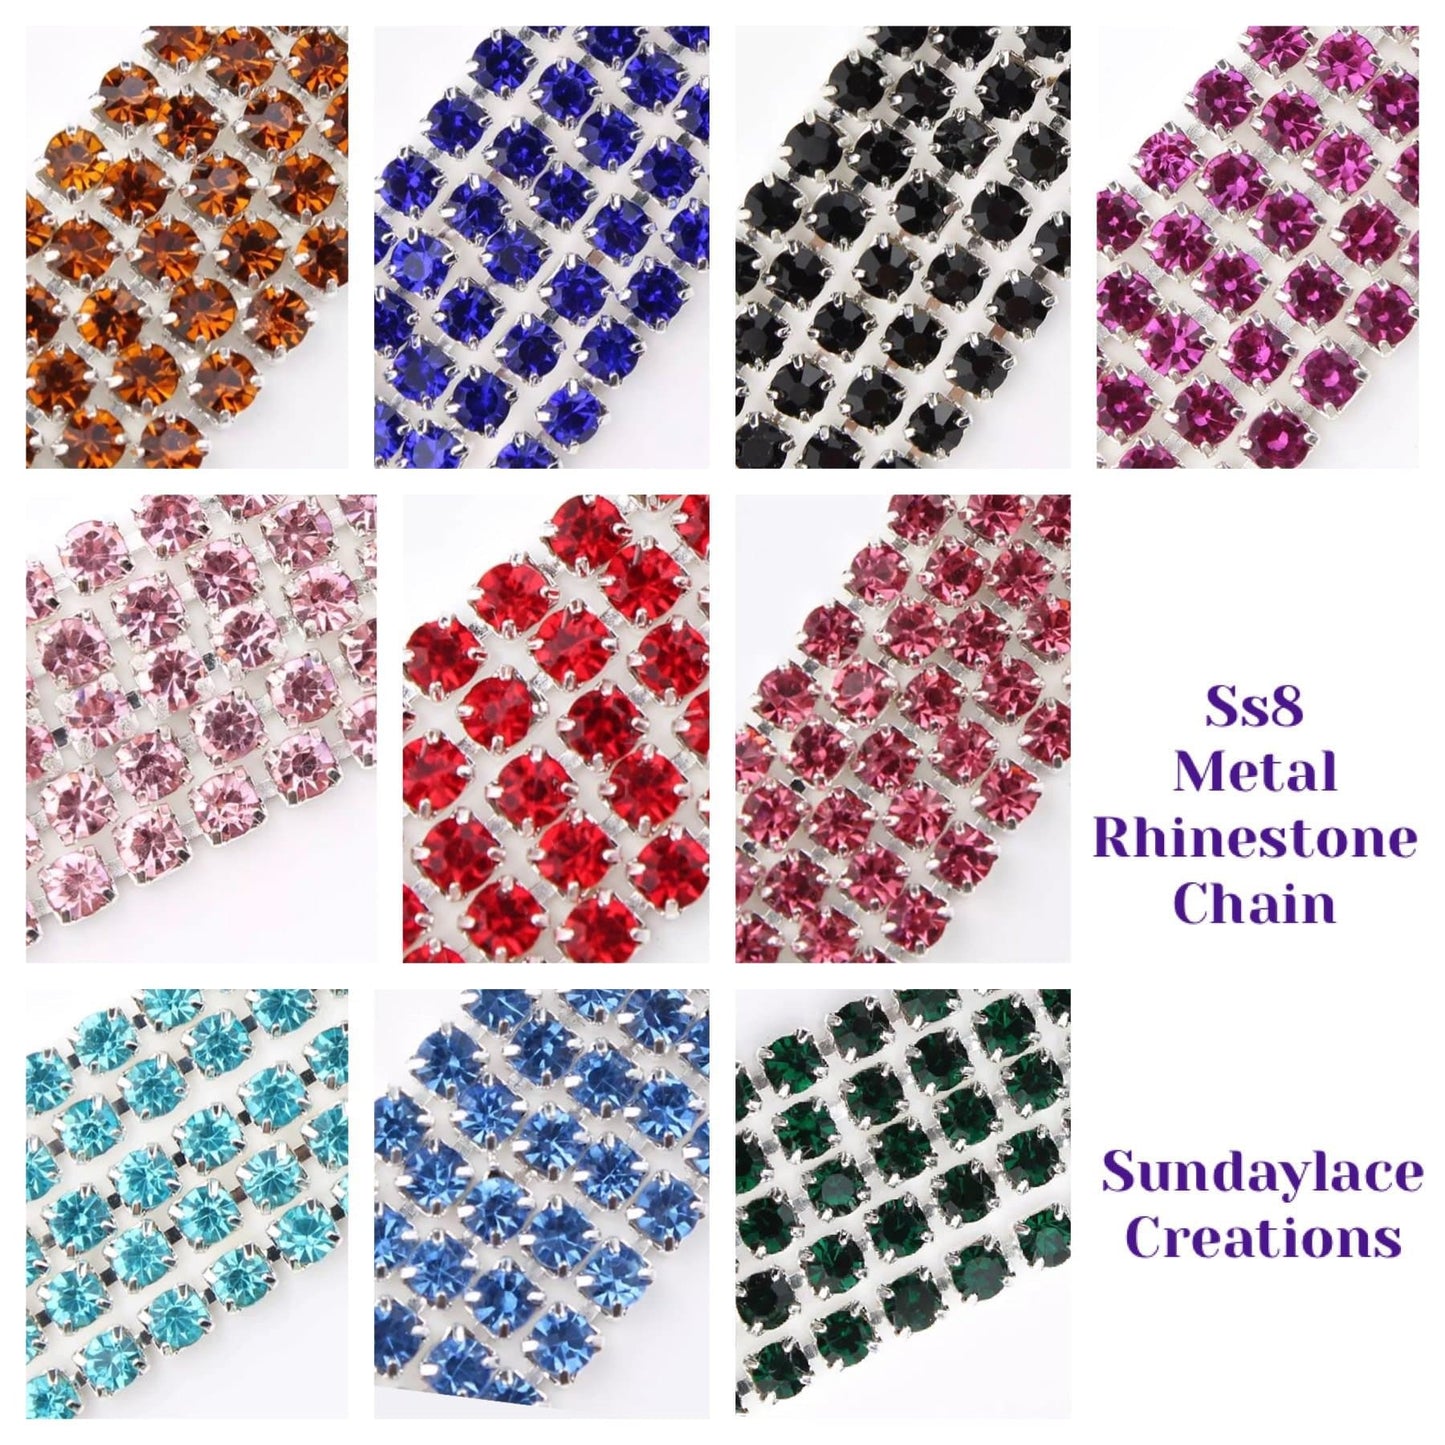 Sundaylace Creations & Bling Ss8 Metal Rhinestone Chain Ss8 Multiple Colours in  Silver Cup Metal Rhinestone Chain